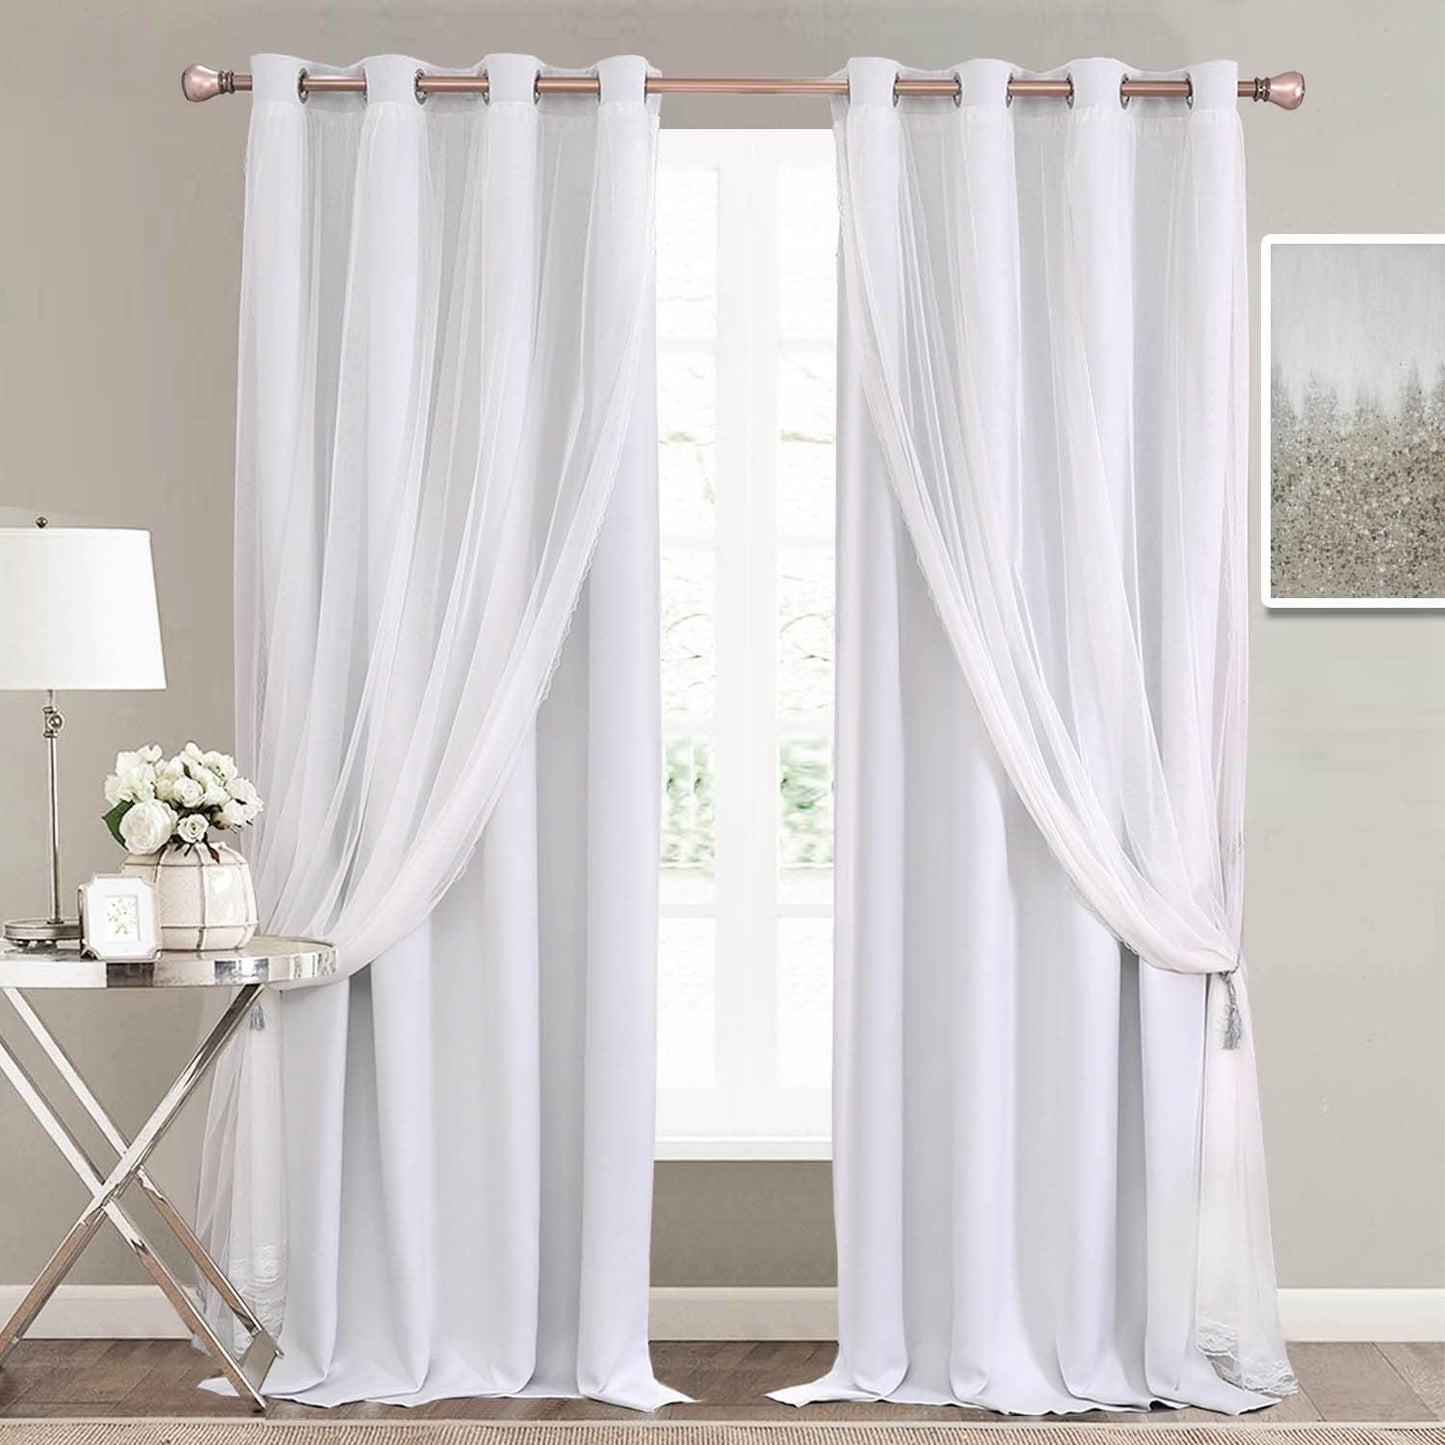 Pink Blackout Curtains 84 Inch Length - Double Layers Princess Girls Curtains & Draperies Panels for Kids Bedroom Living Room Nursery Pink Lace Hem Room Darkening Curtains, 2 Pcs  SOFJAGETQ Greyish White 52 X 96 